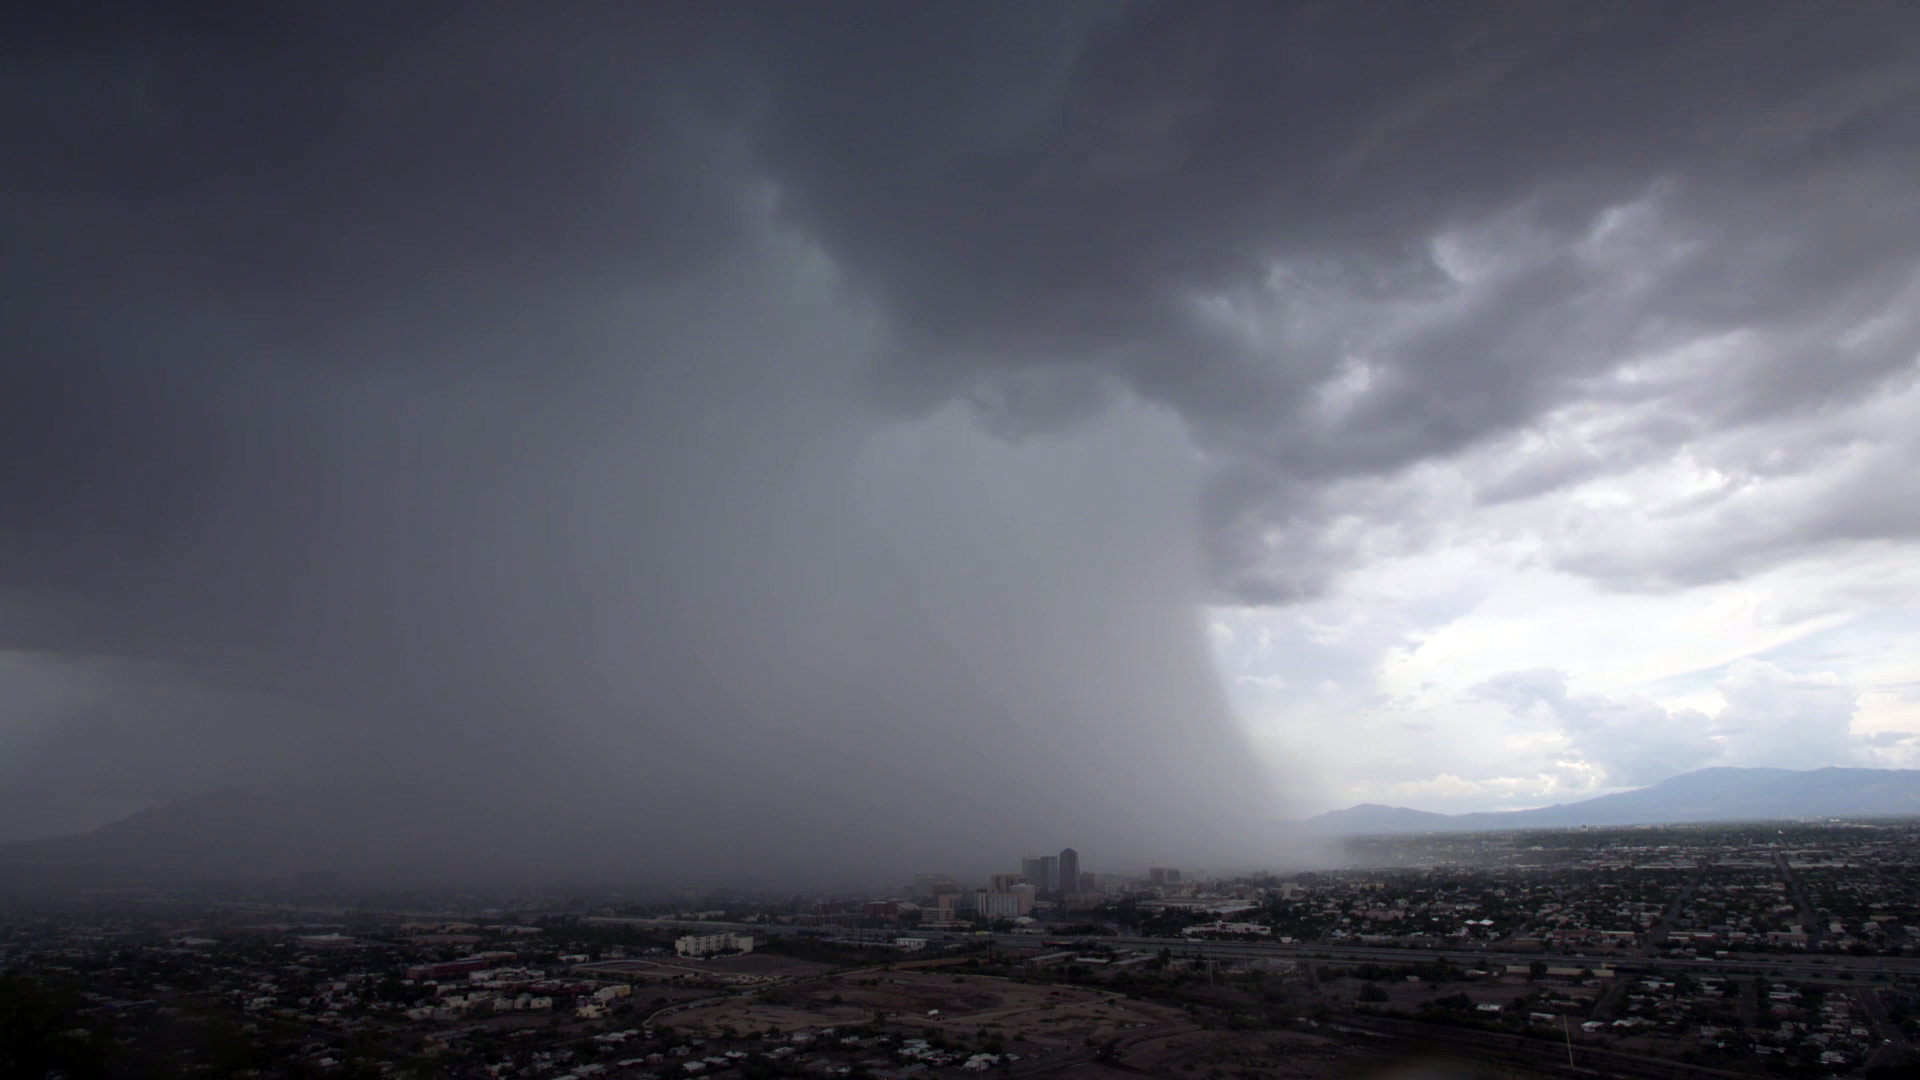 Tucson enjoyed its second straight active monsoon in 2022.